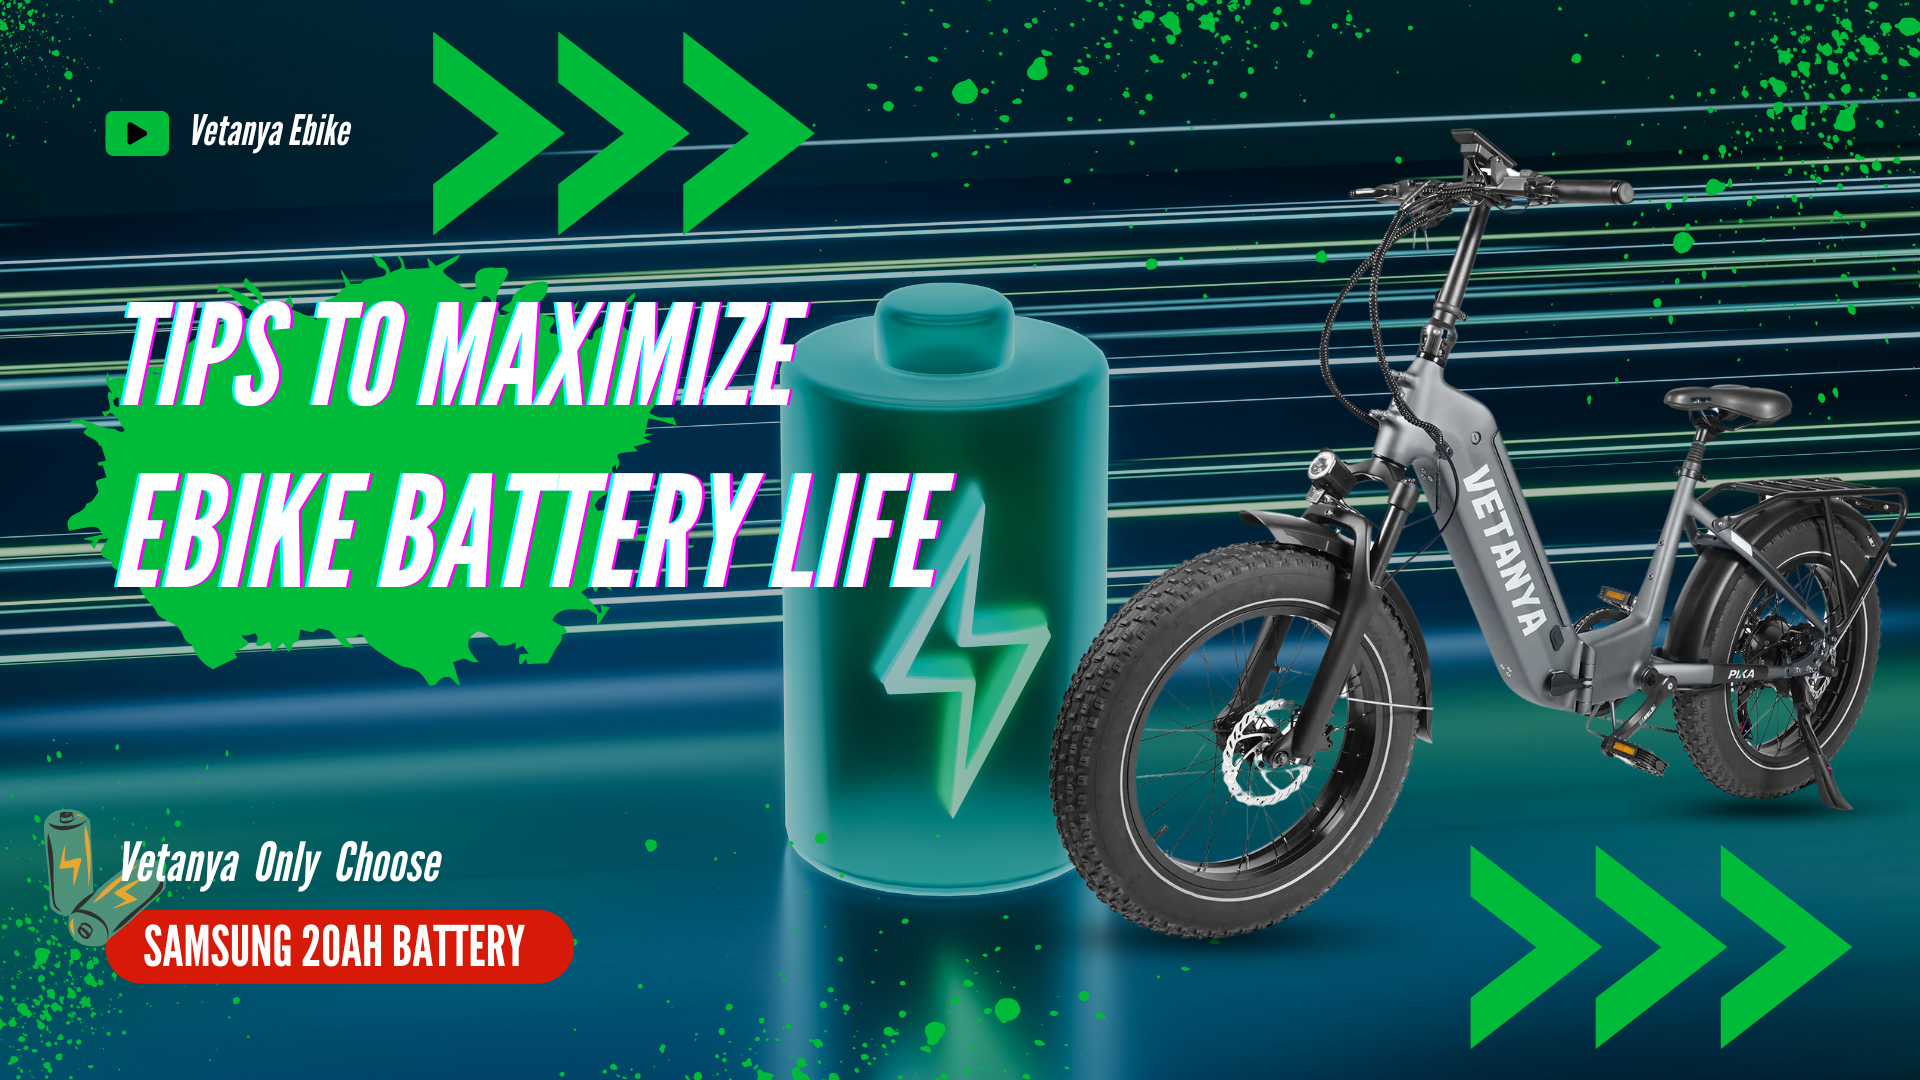 Charge Up, Ride On: Tips to Maximize Ebike Battery Life